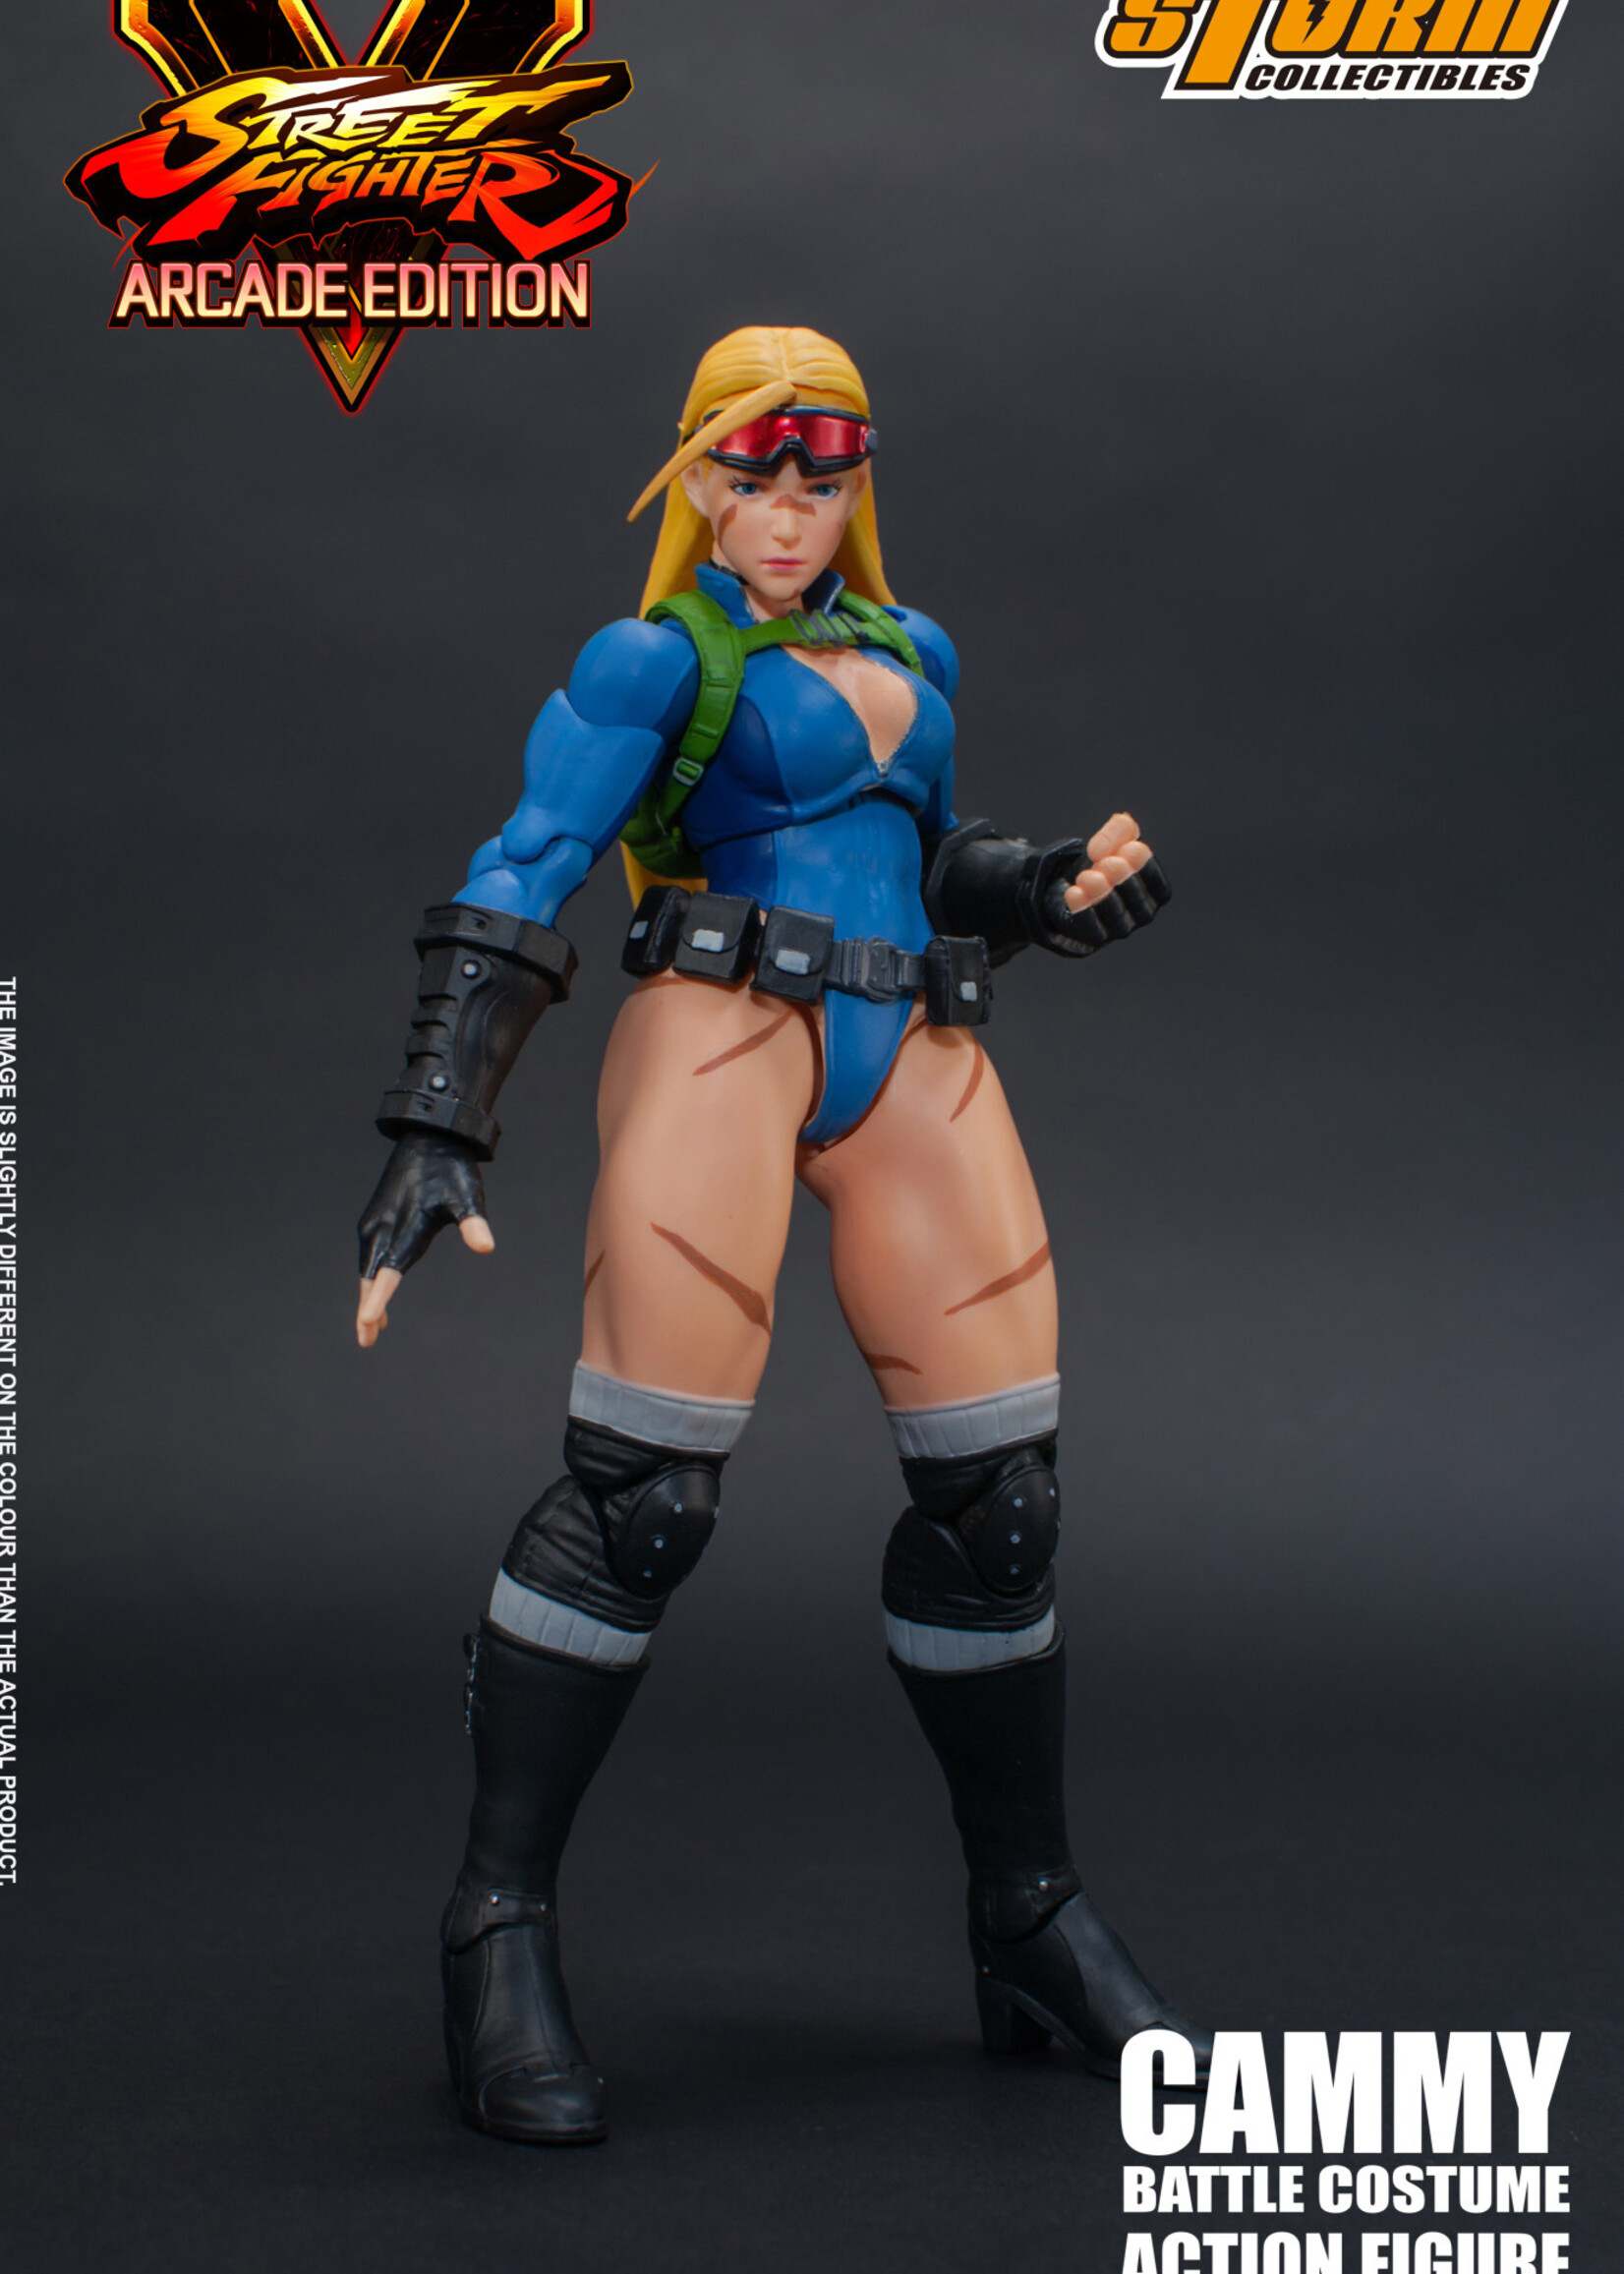 Storm Collectibles 87113 Cammy Battle Costume "Street Fighter V", Storm Collectibles 1/12 Action Figure